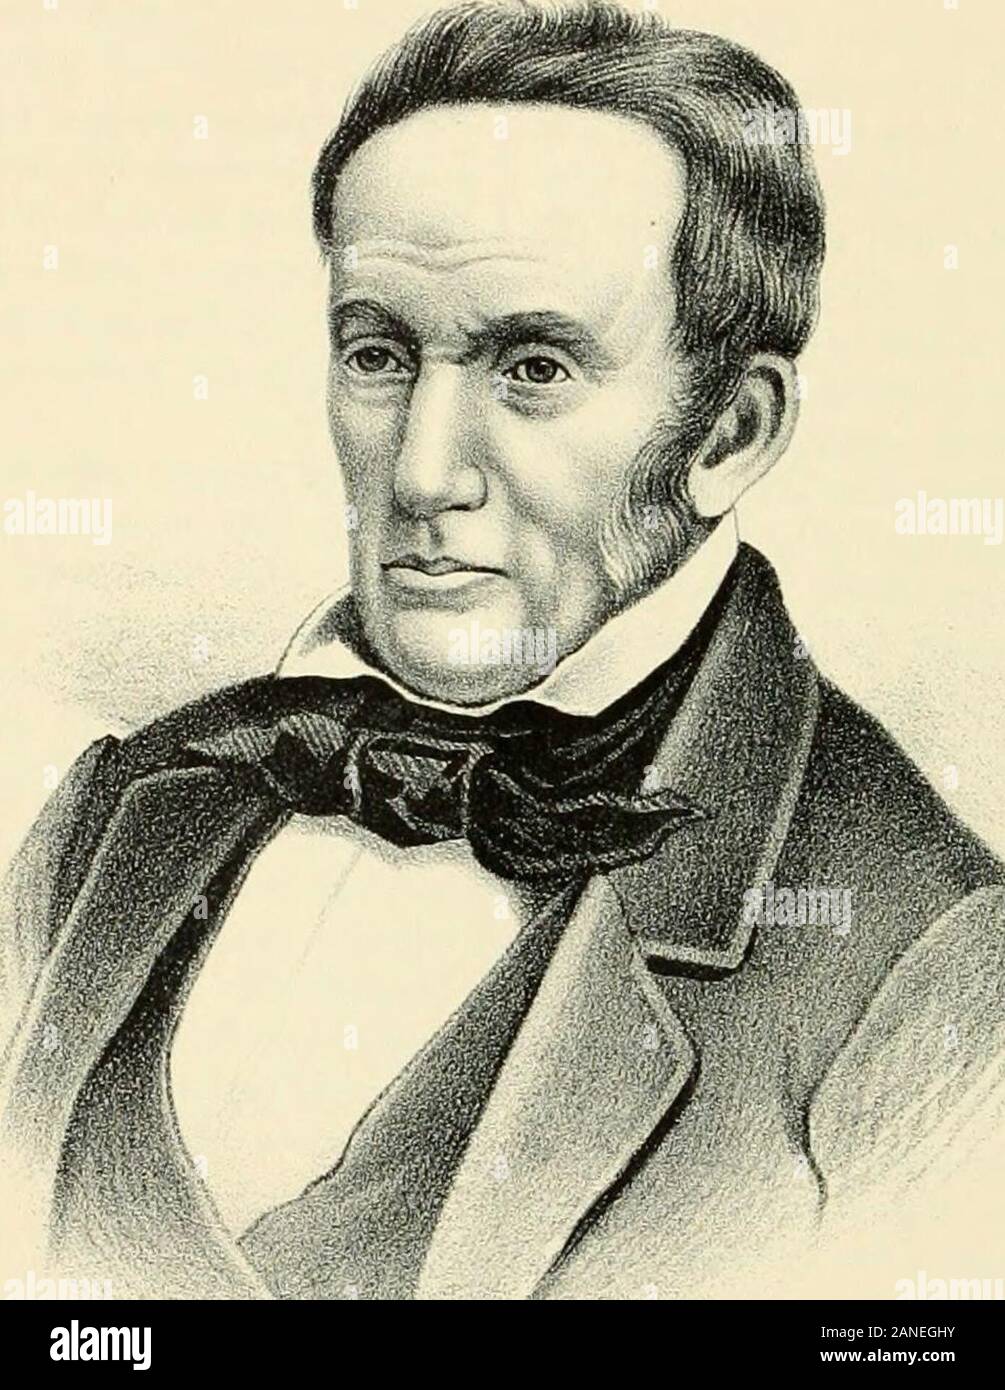 Portrait and biographical record of Ford County, Illinois : containing biographical sketches of prominent and representative citizens, together with biographies of all the governors of the state, and of the presidents of the United States . of liis office, he nearly always pur-chased the goods himself with which to supply thestores. Although not a regular practitioner of medi-cine, he studied the healing art to a considerable ex-tent, and took great pleasure in prescribing for, andtaking care of, the sick, generally without charge.He was also liberal to the poor, several widows andministers of Stock Photo